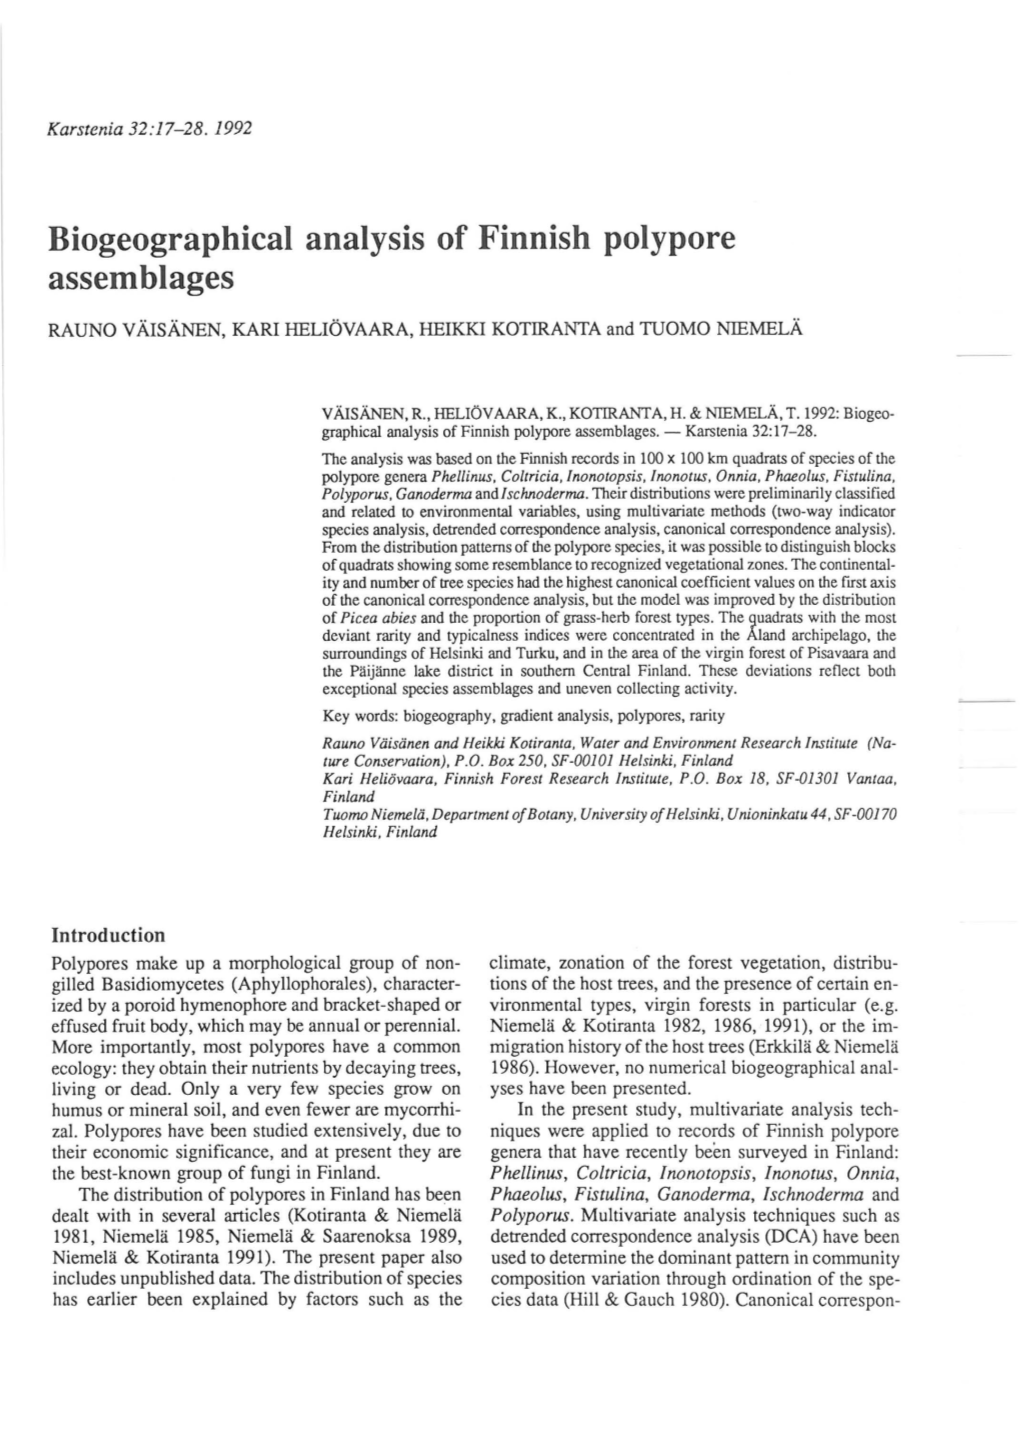 Biogeographical Analysis of Finnish Polypore Assemblages